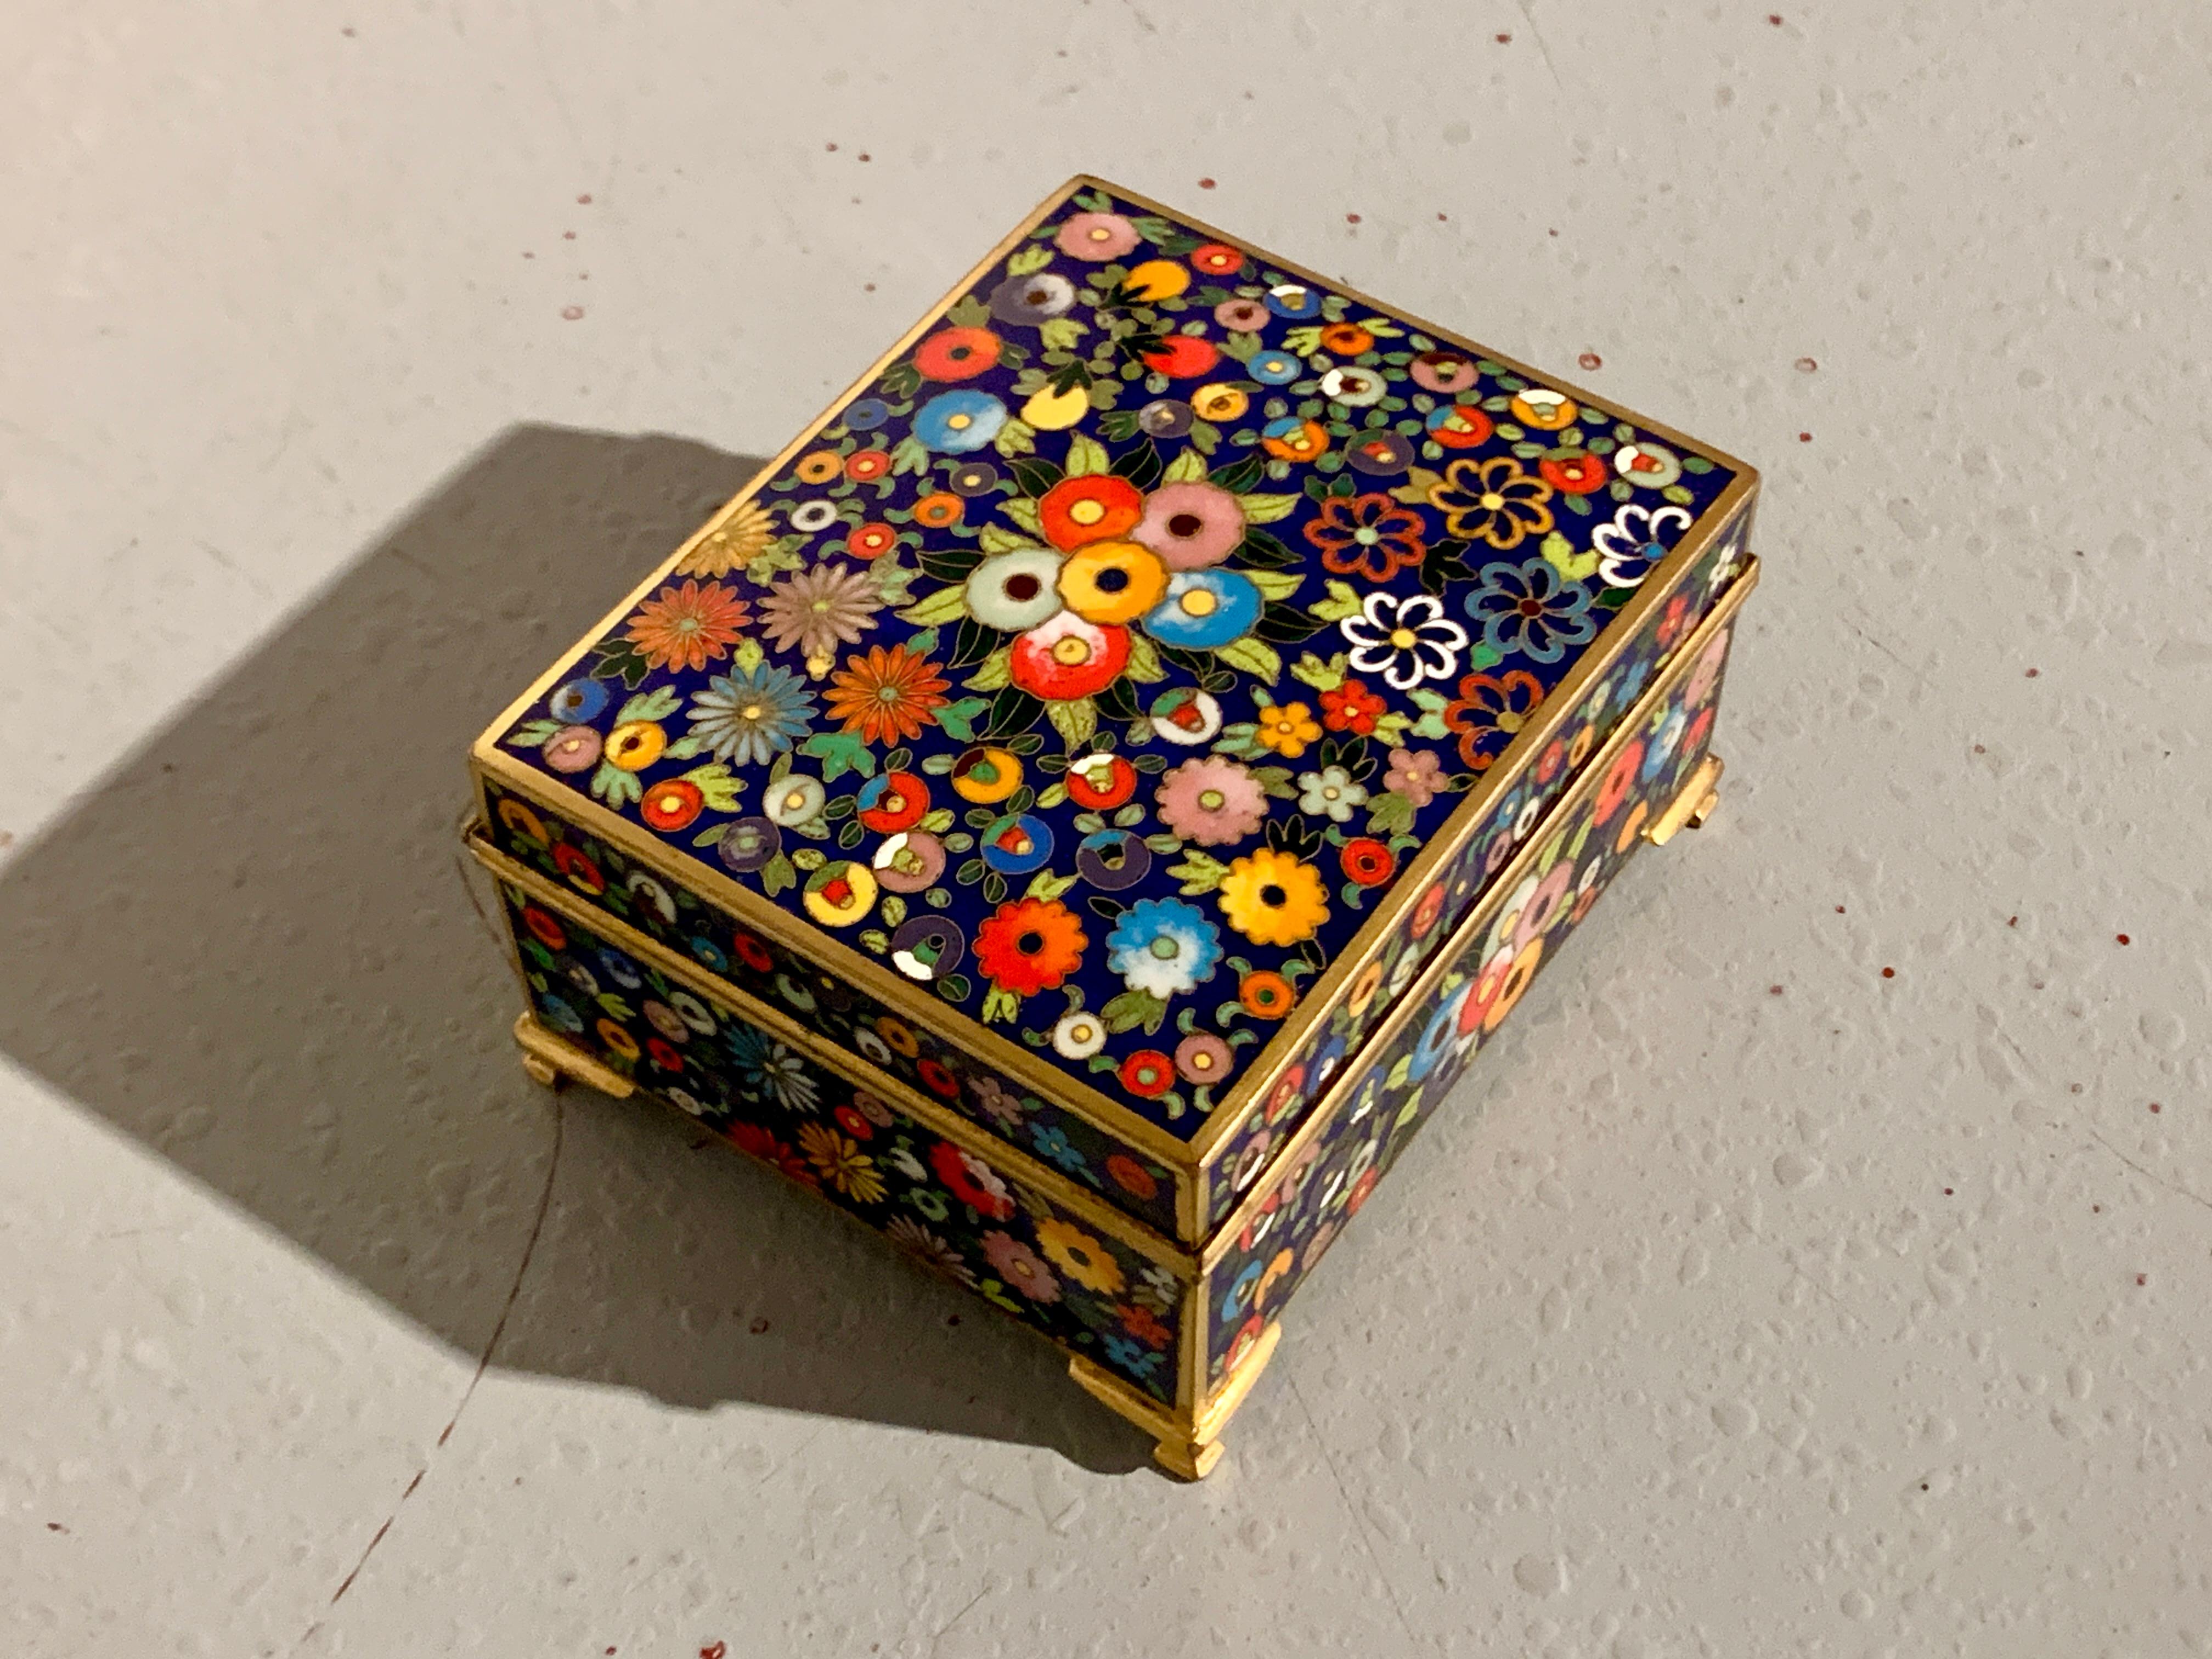 A fantastic small Japanese cloisonne trinket or jewelry box by Inaba, Taisho Period, circa 1920, Japan.

The cloisonne box with a slightly domed and hinged lid, set on raised feet. The box decorated all over in a dense millefleurs (thousand